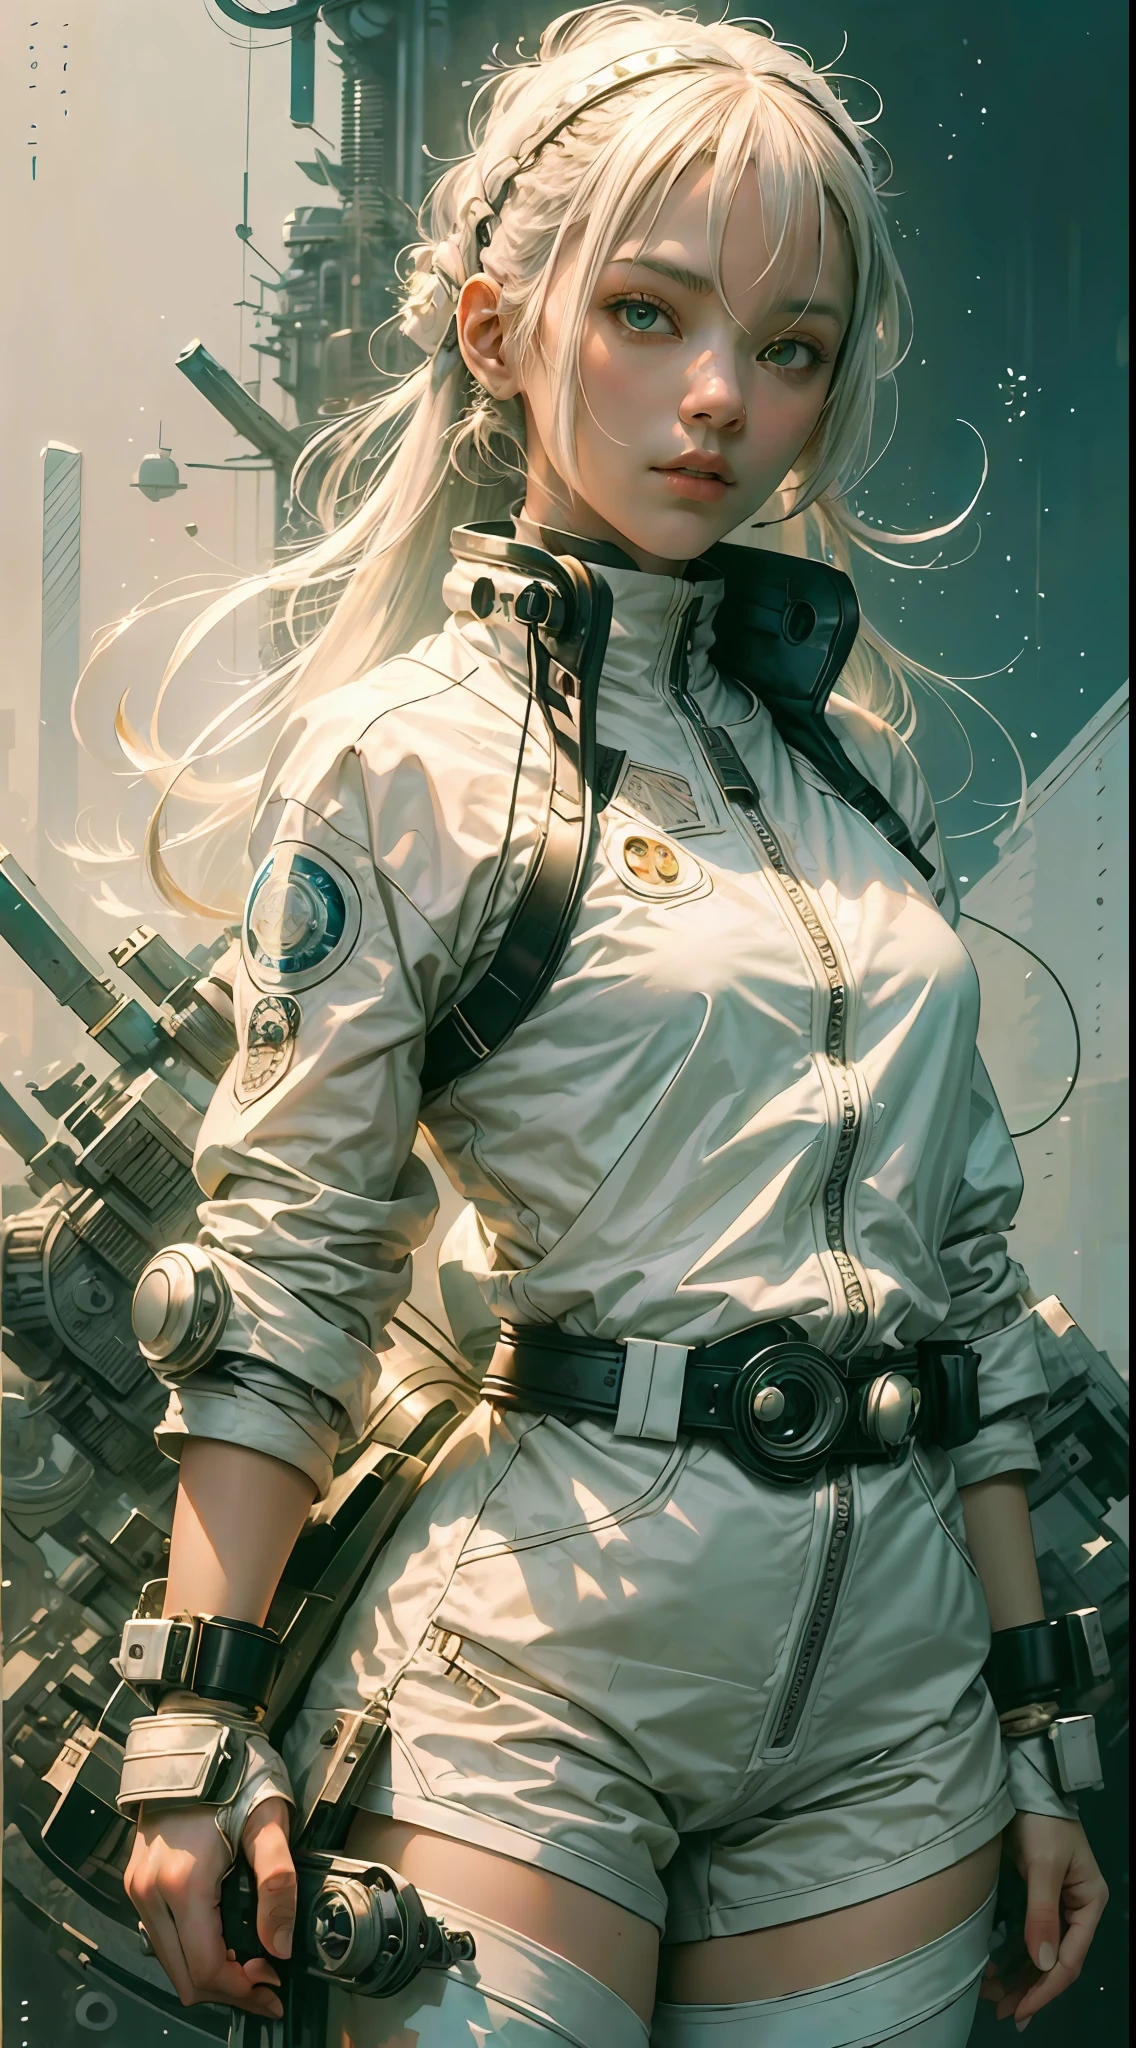 1monk warrior girl with white techwear clothes, white long hair, laces, abstract vintage scifi background, art by Moebius, art by Ashley Wood